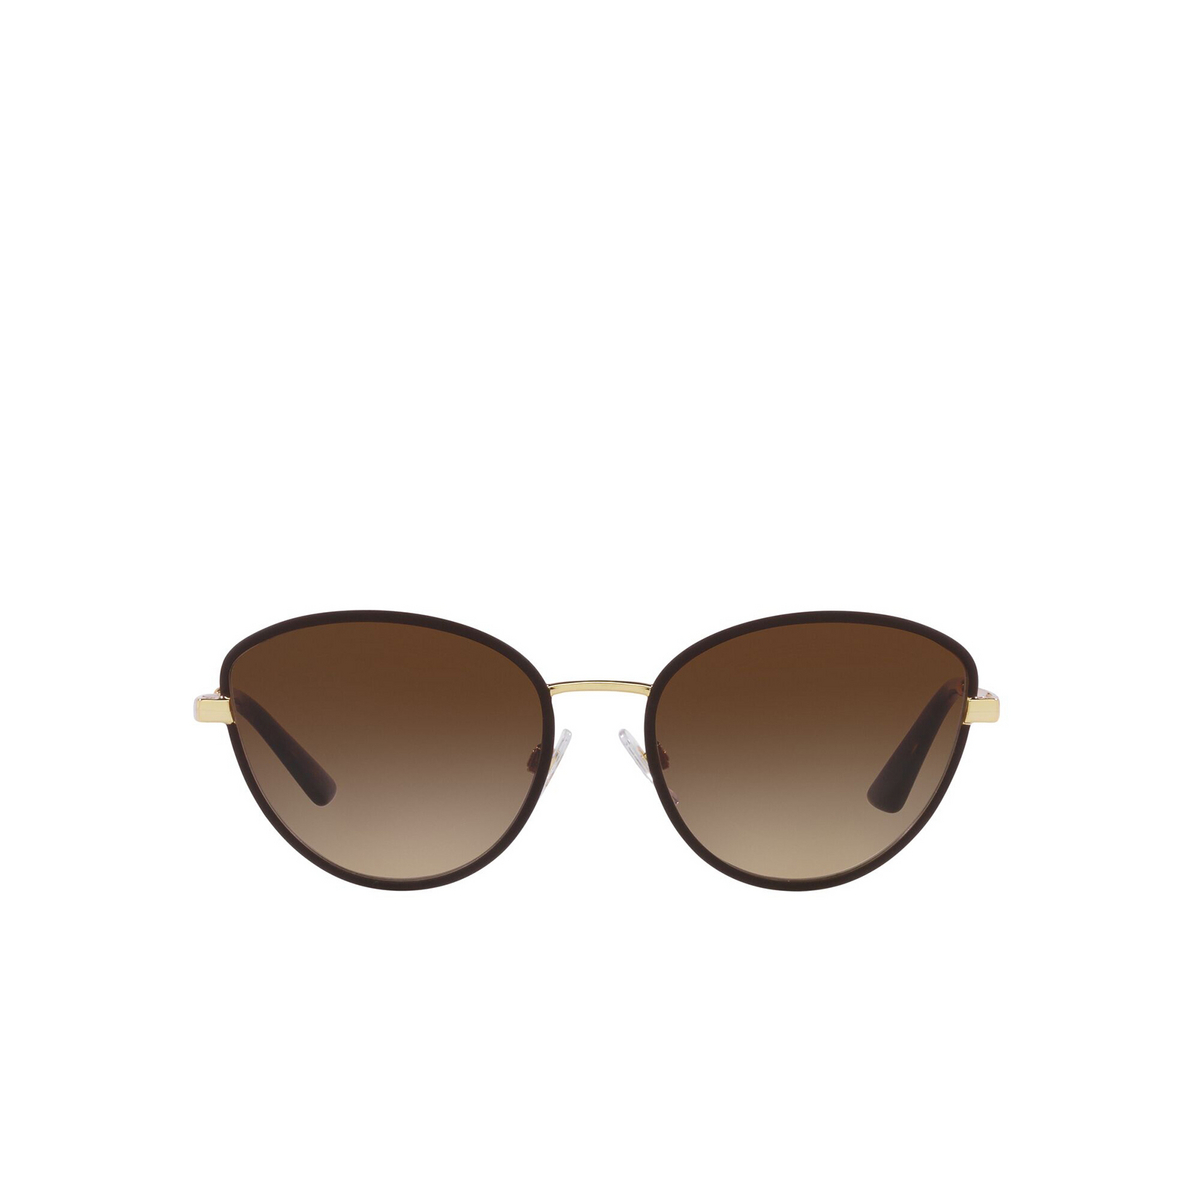 Dolce & Gabbana® Butterfly Sunglasses: DG2280 color Gold / Matte Brown 132013 - product thumbnail 1/3.